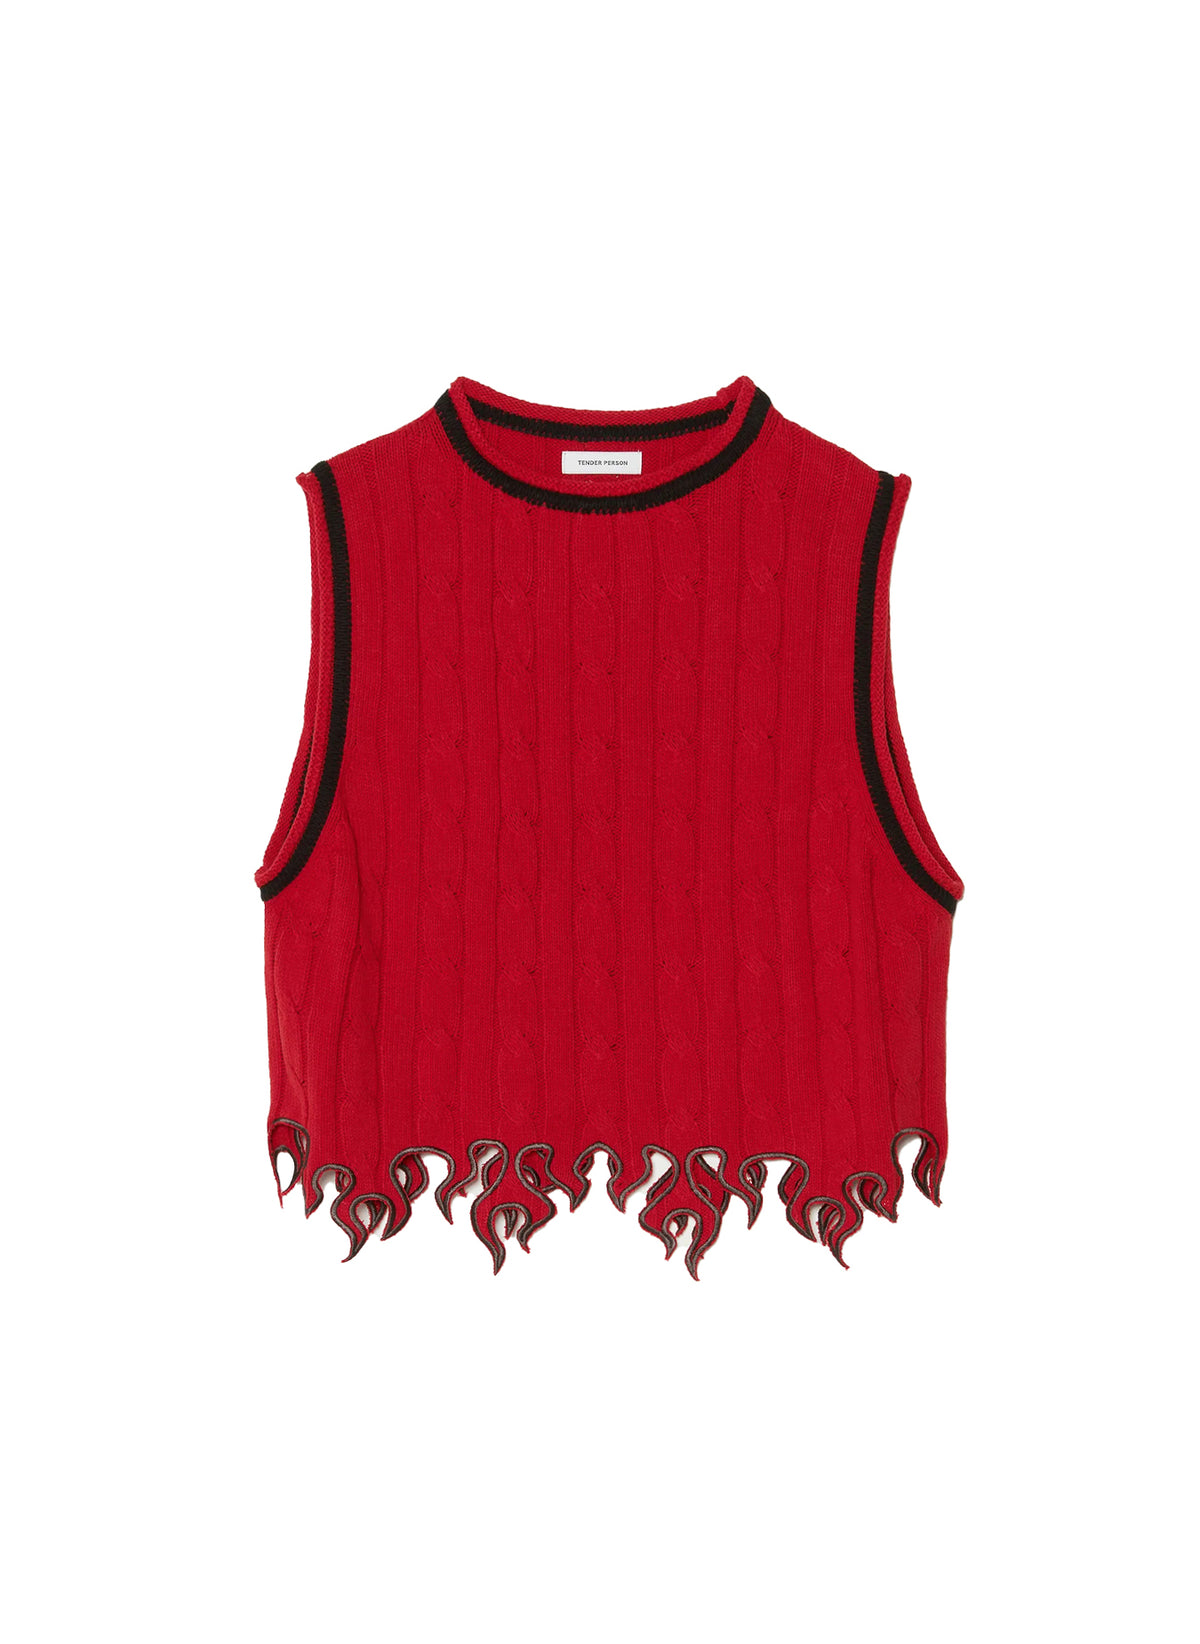 TENDER PERSON / FLAME KNIT VEST RED